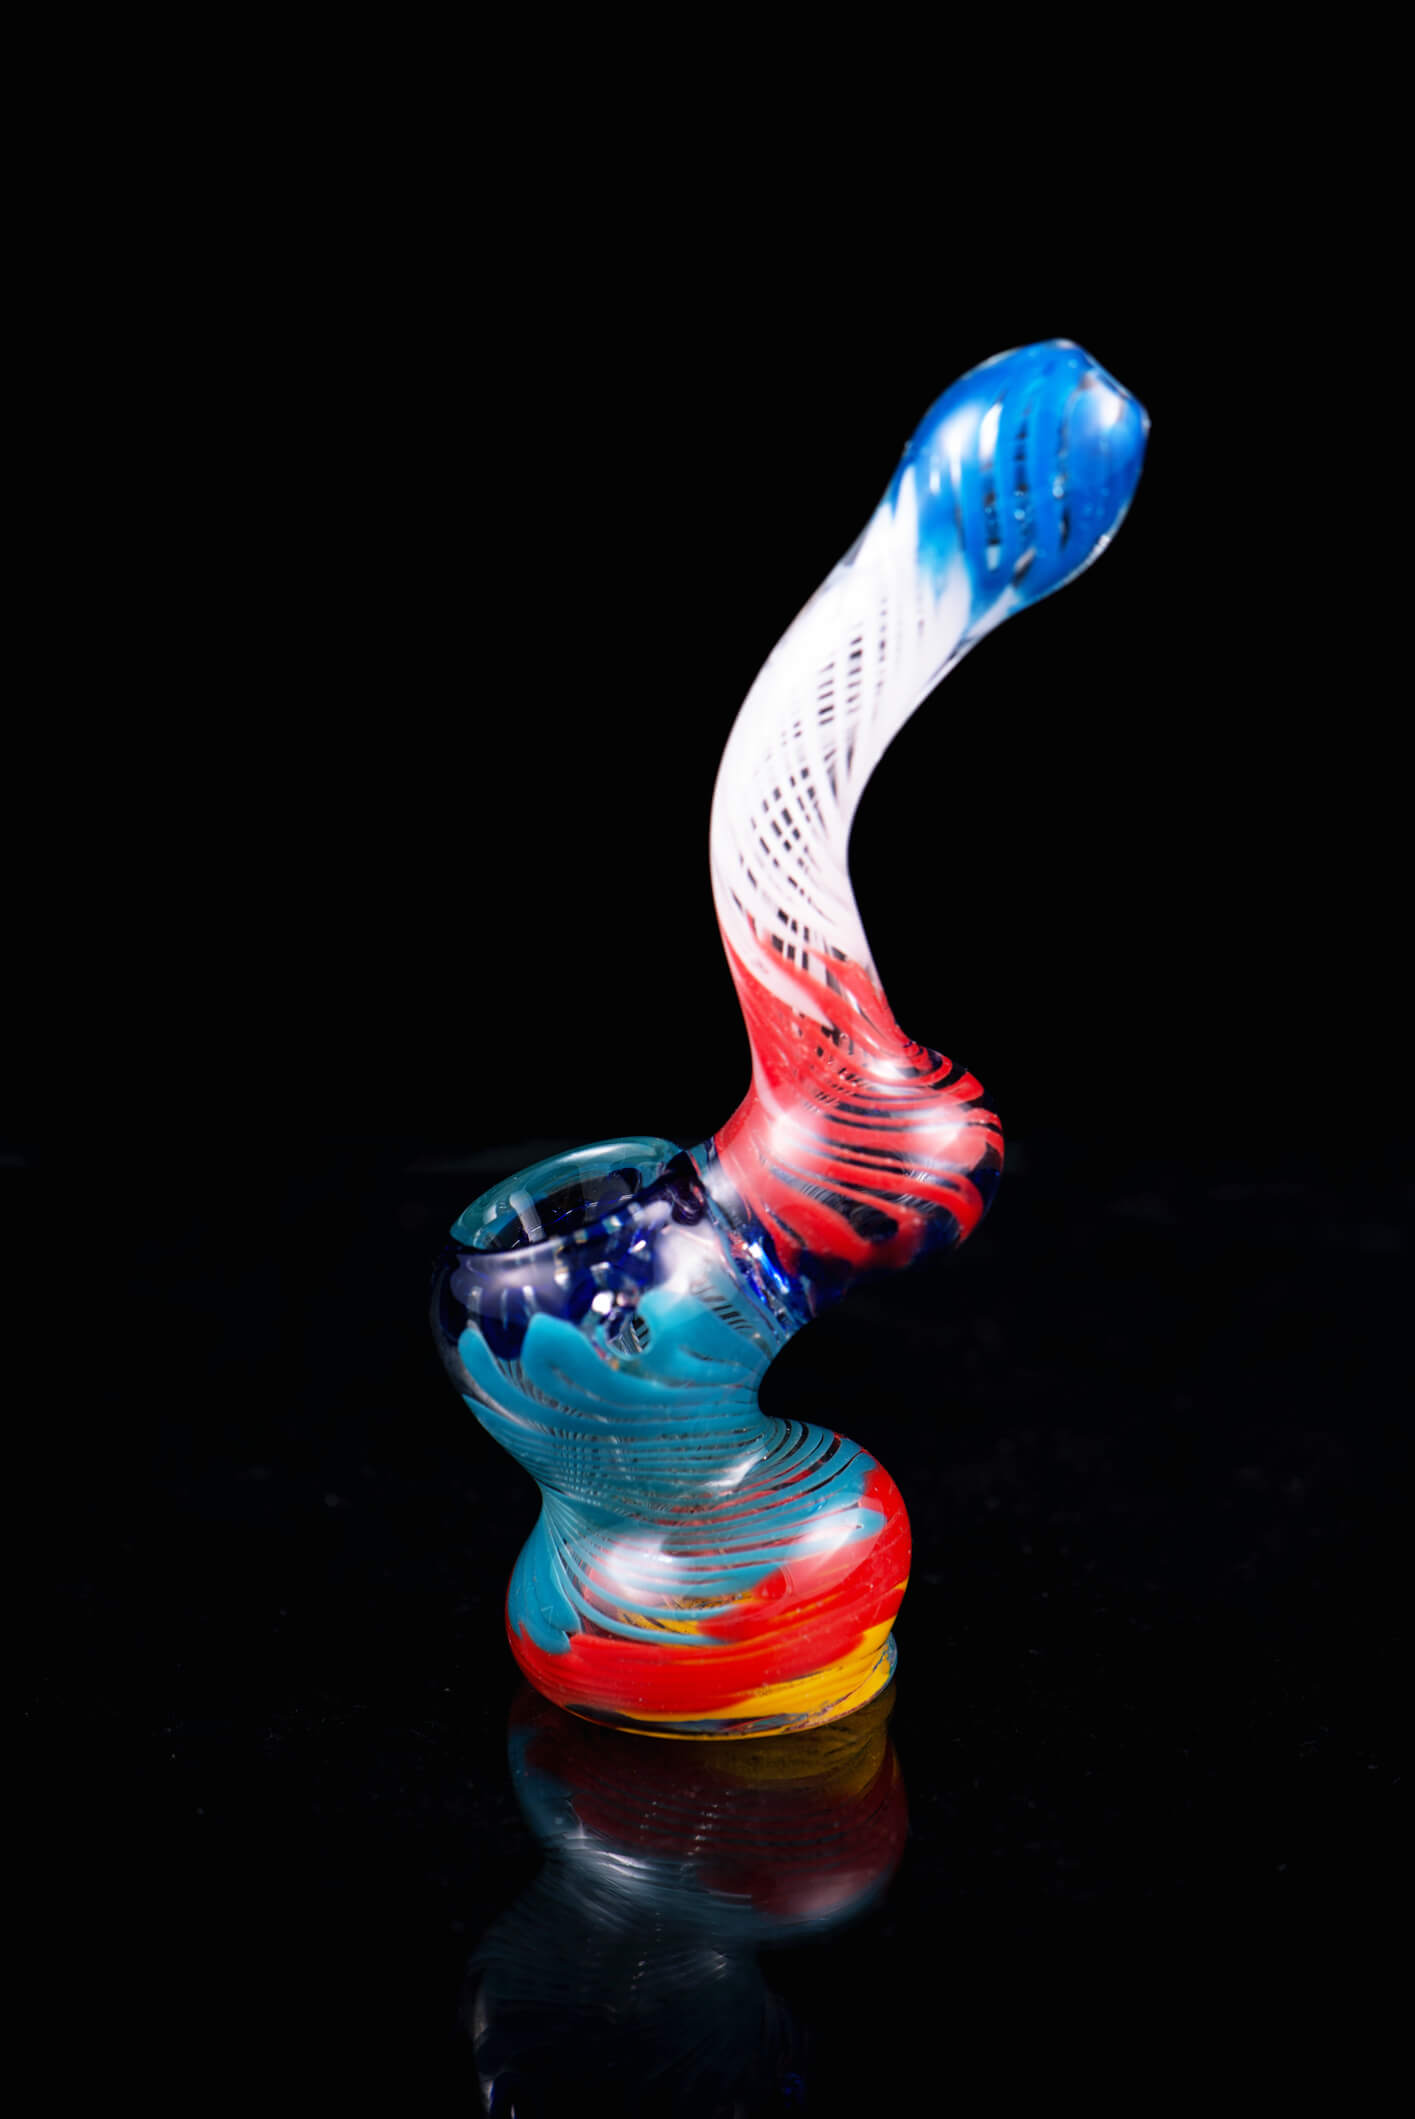 Small glass bubbler used for smoking dried cannabis isolated over black background